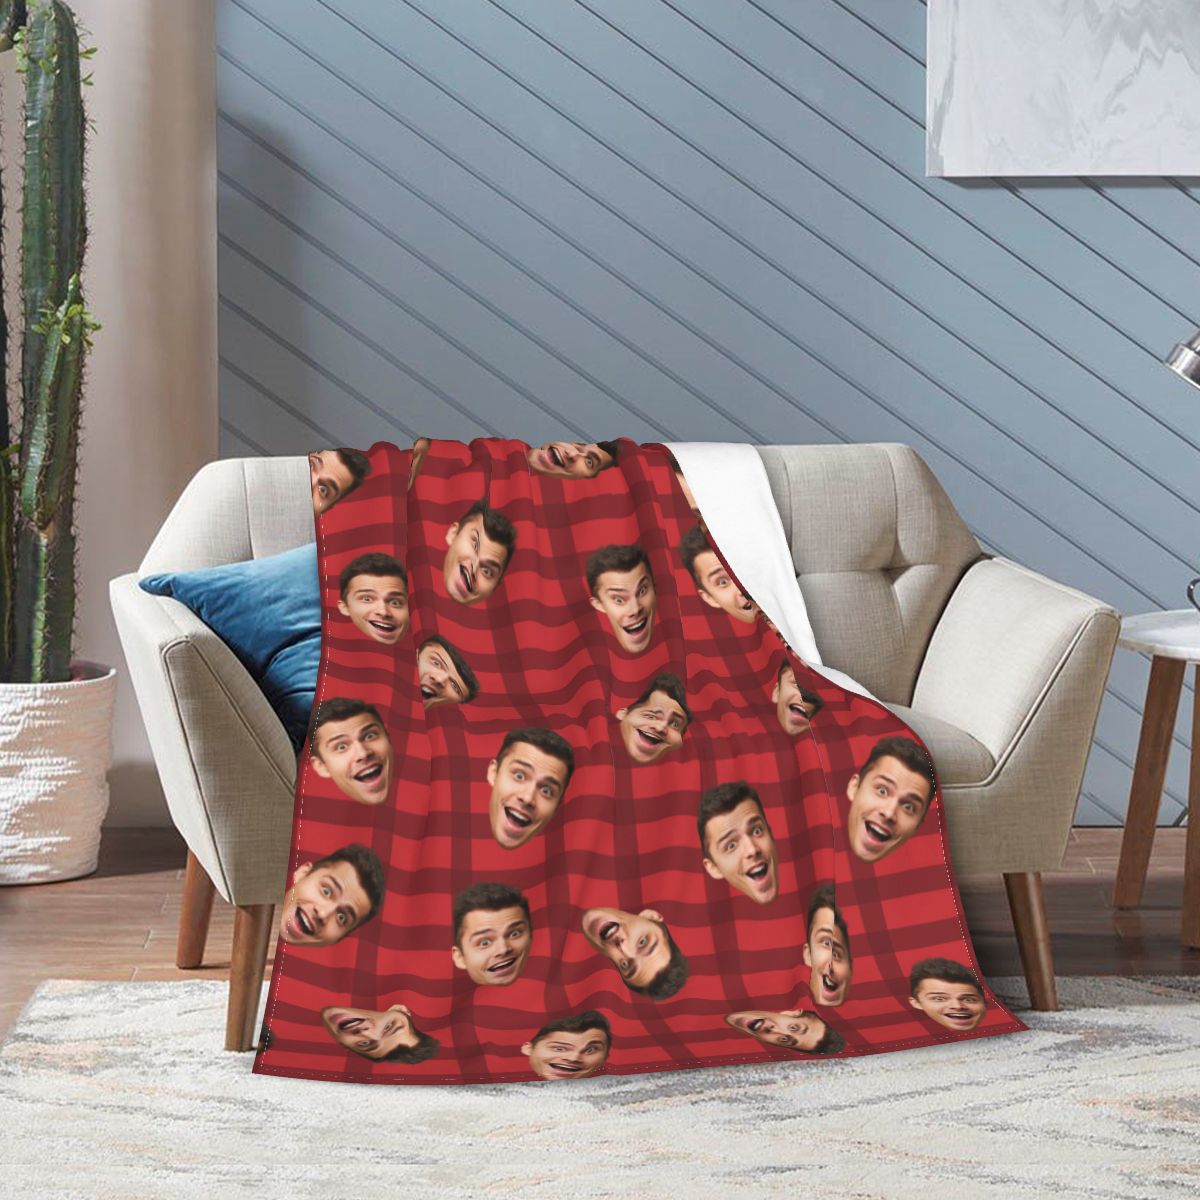 Custom Face Blanket Personalized Photo Blanket Gifts